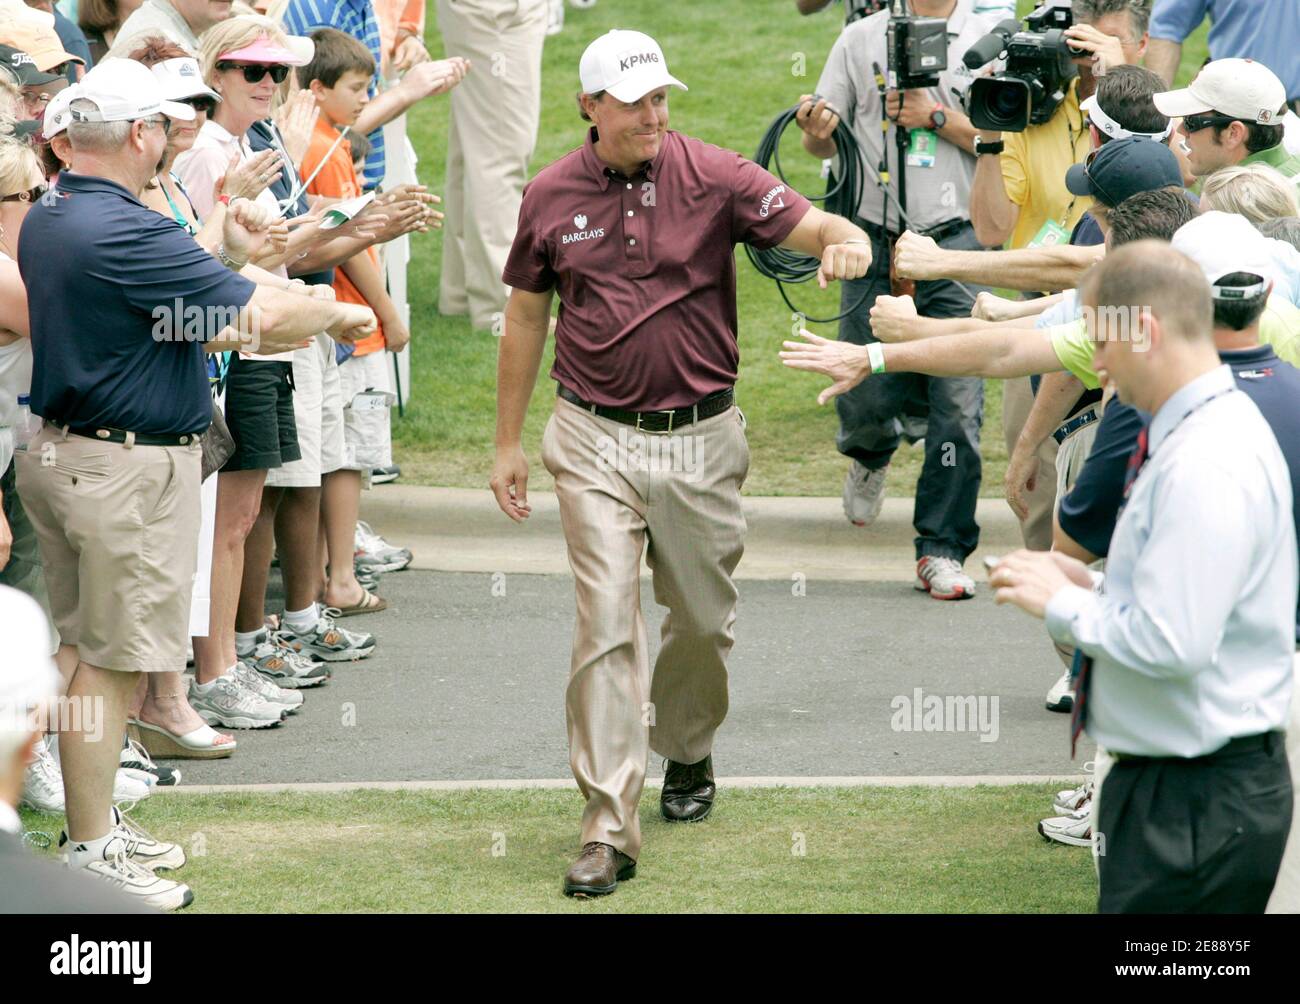 Phil Mickelson of the United States walks to the first tee before his third round of the Quail Hollow Championship in Charlotte, North Carolina May 1, 2010. REUTERS/Jason Miczek (UNITED STATES - Tags: SPORT GOLF) Stock Photo